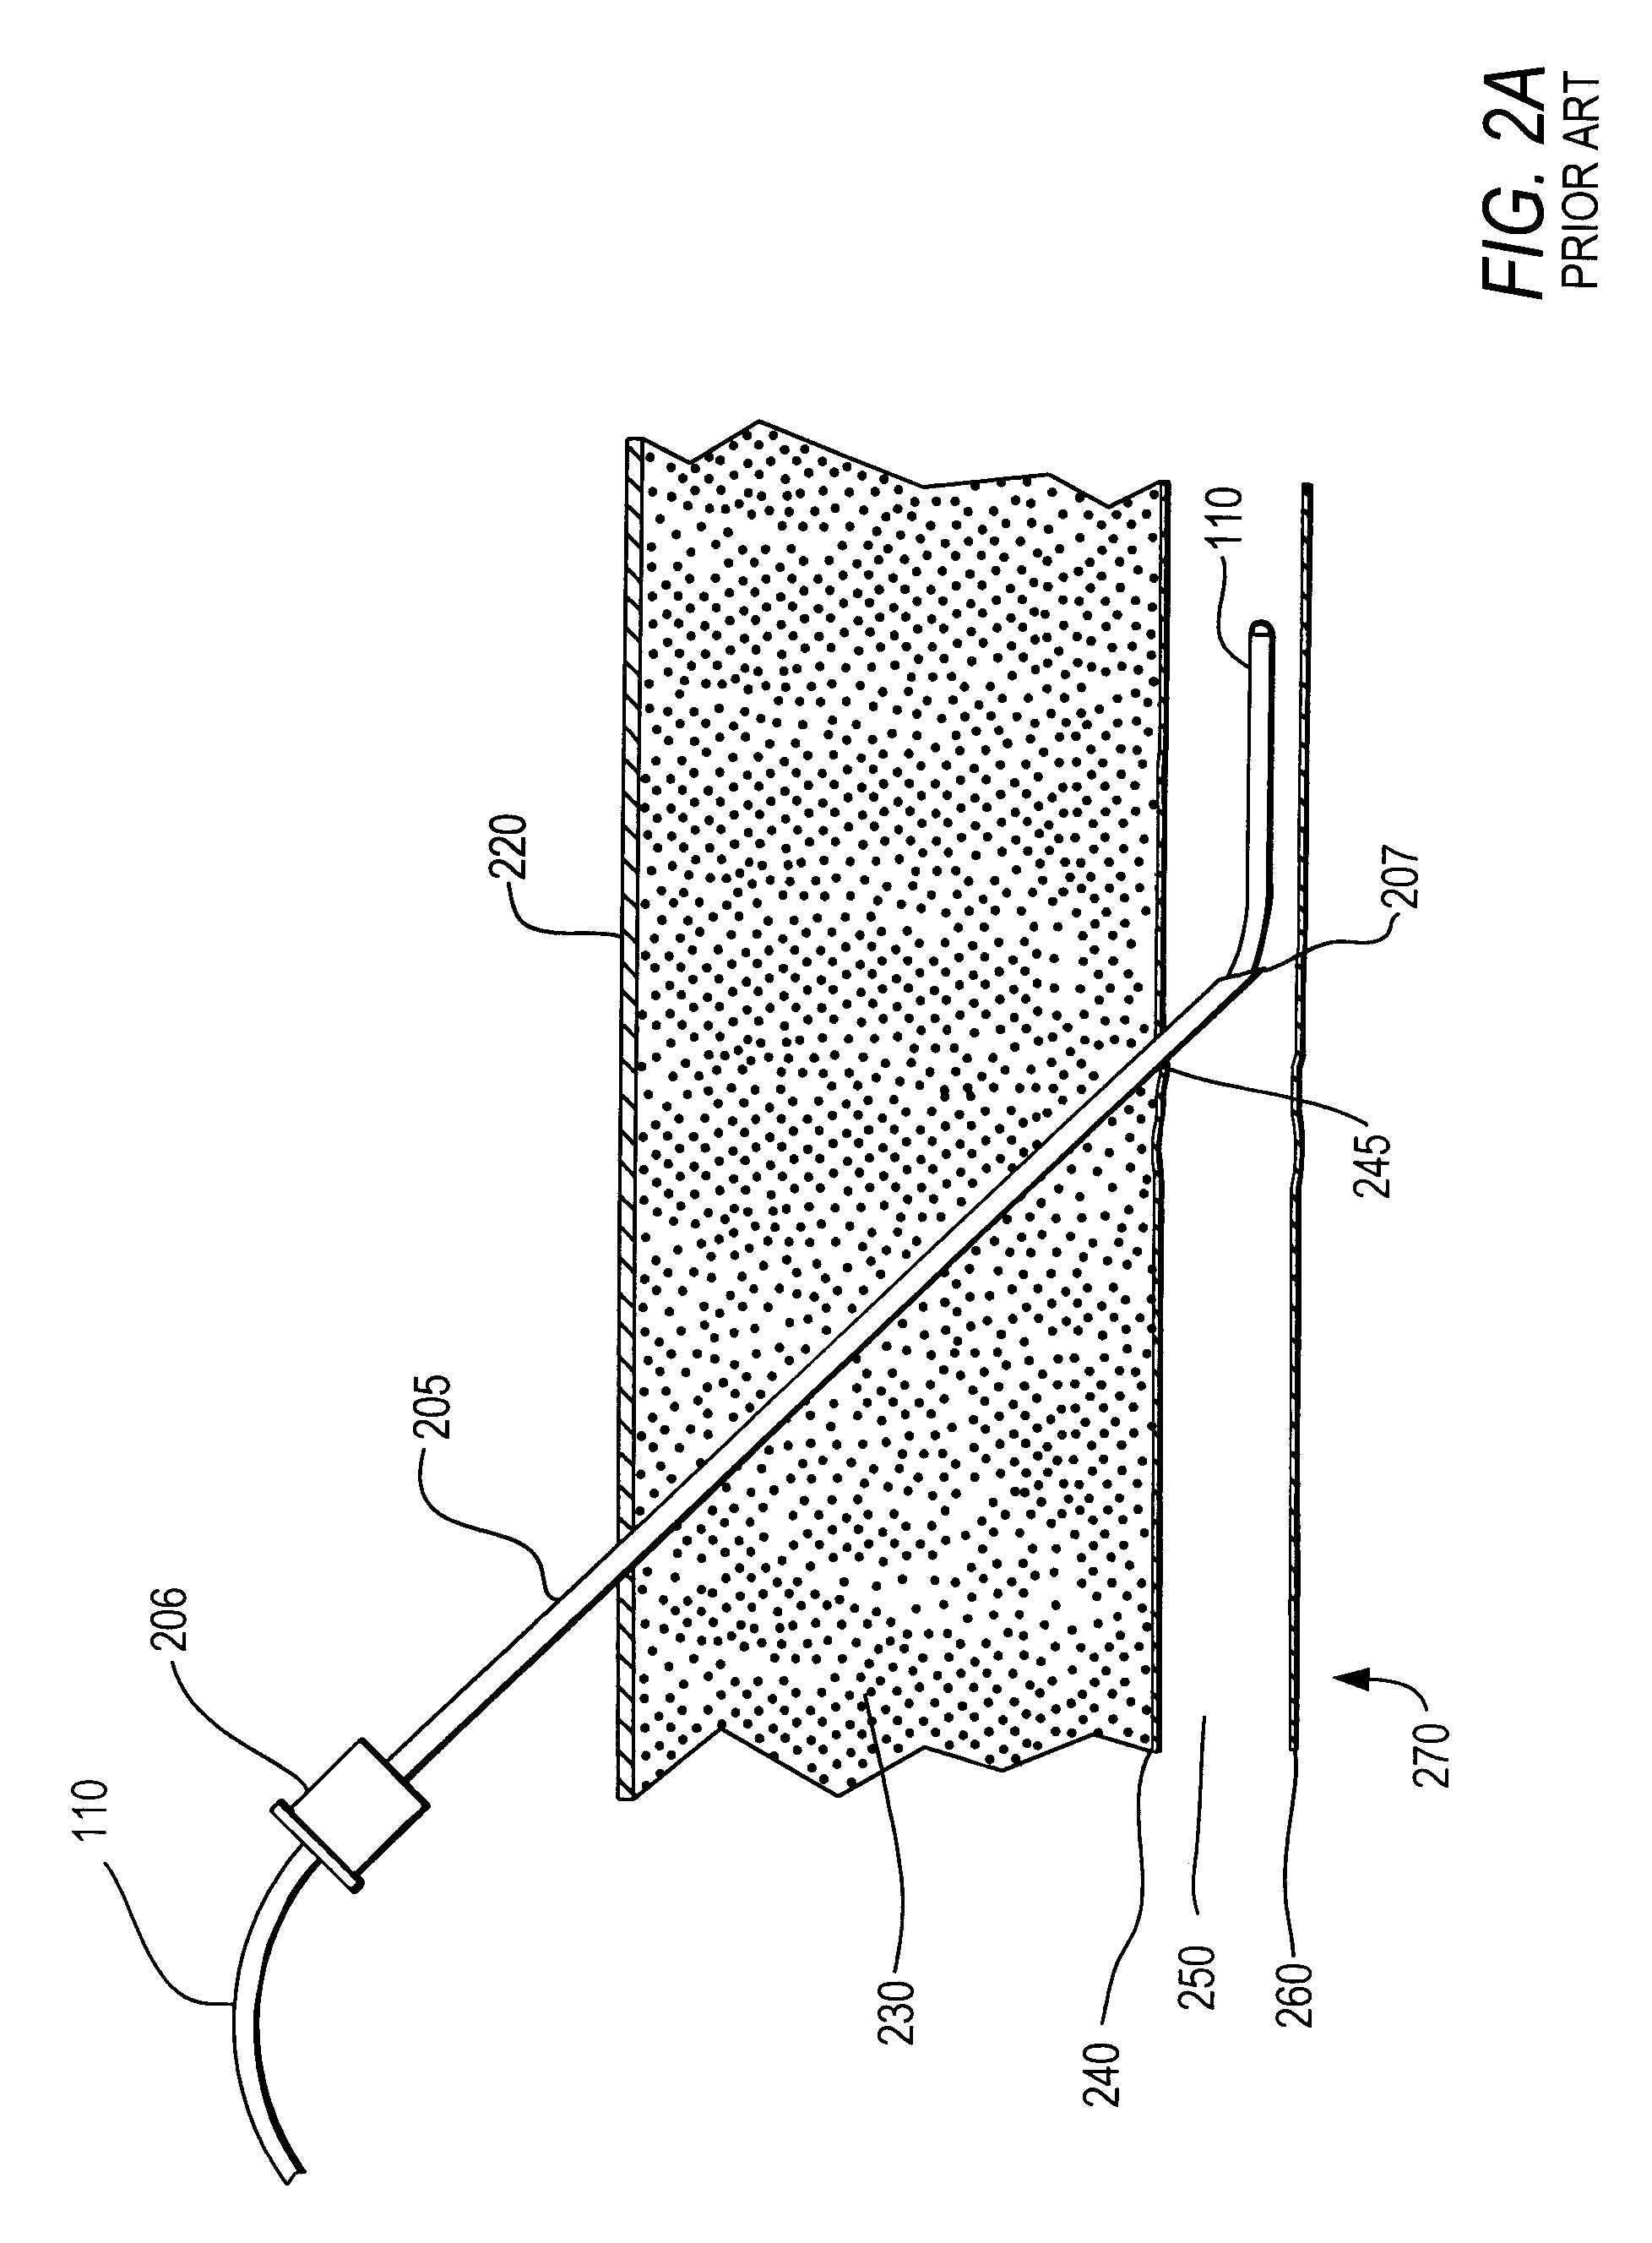 Medical guide element with diameter transition